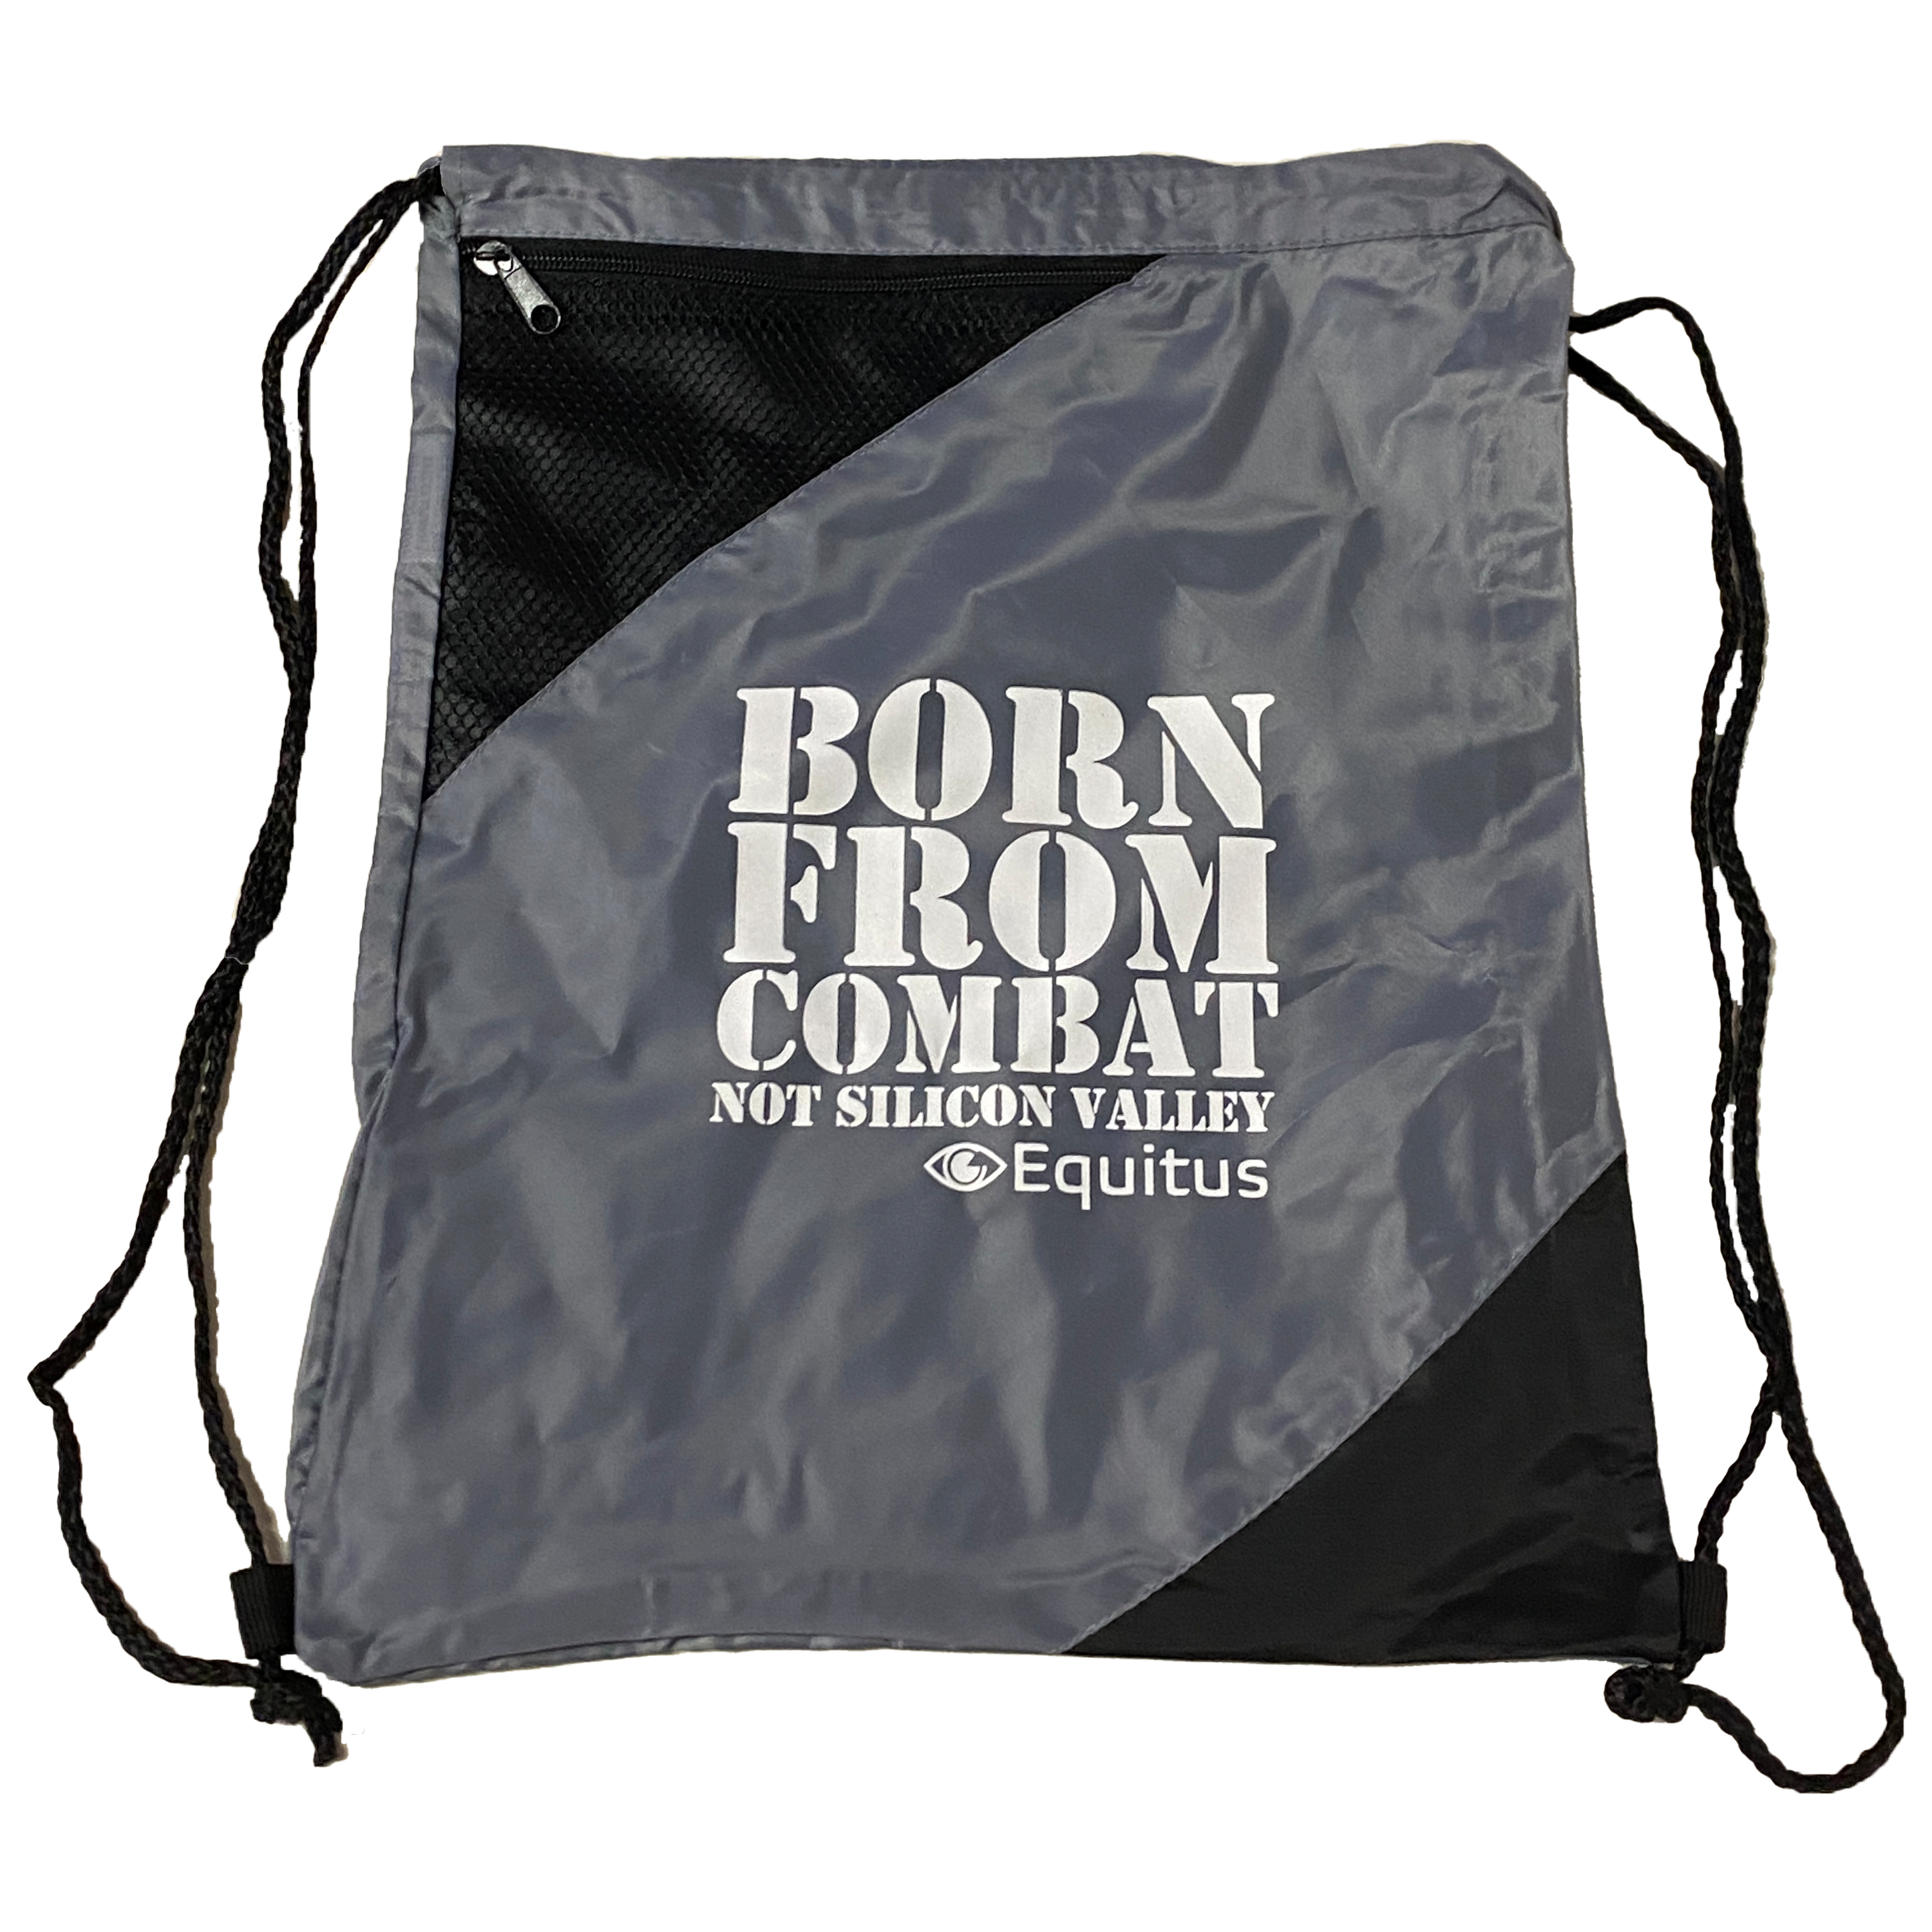 Black and grey drawstring bag with "Born From Combat Not Silicon Valley" logo